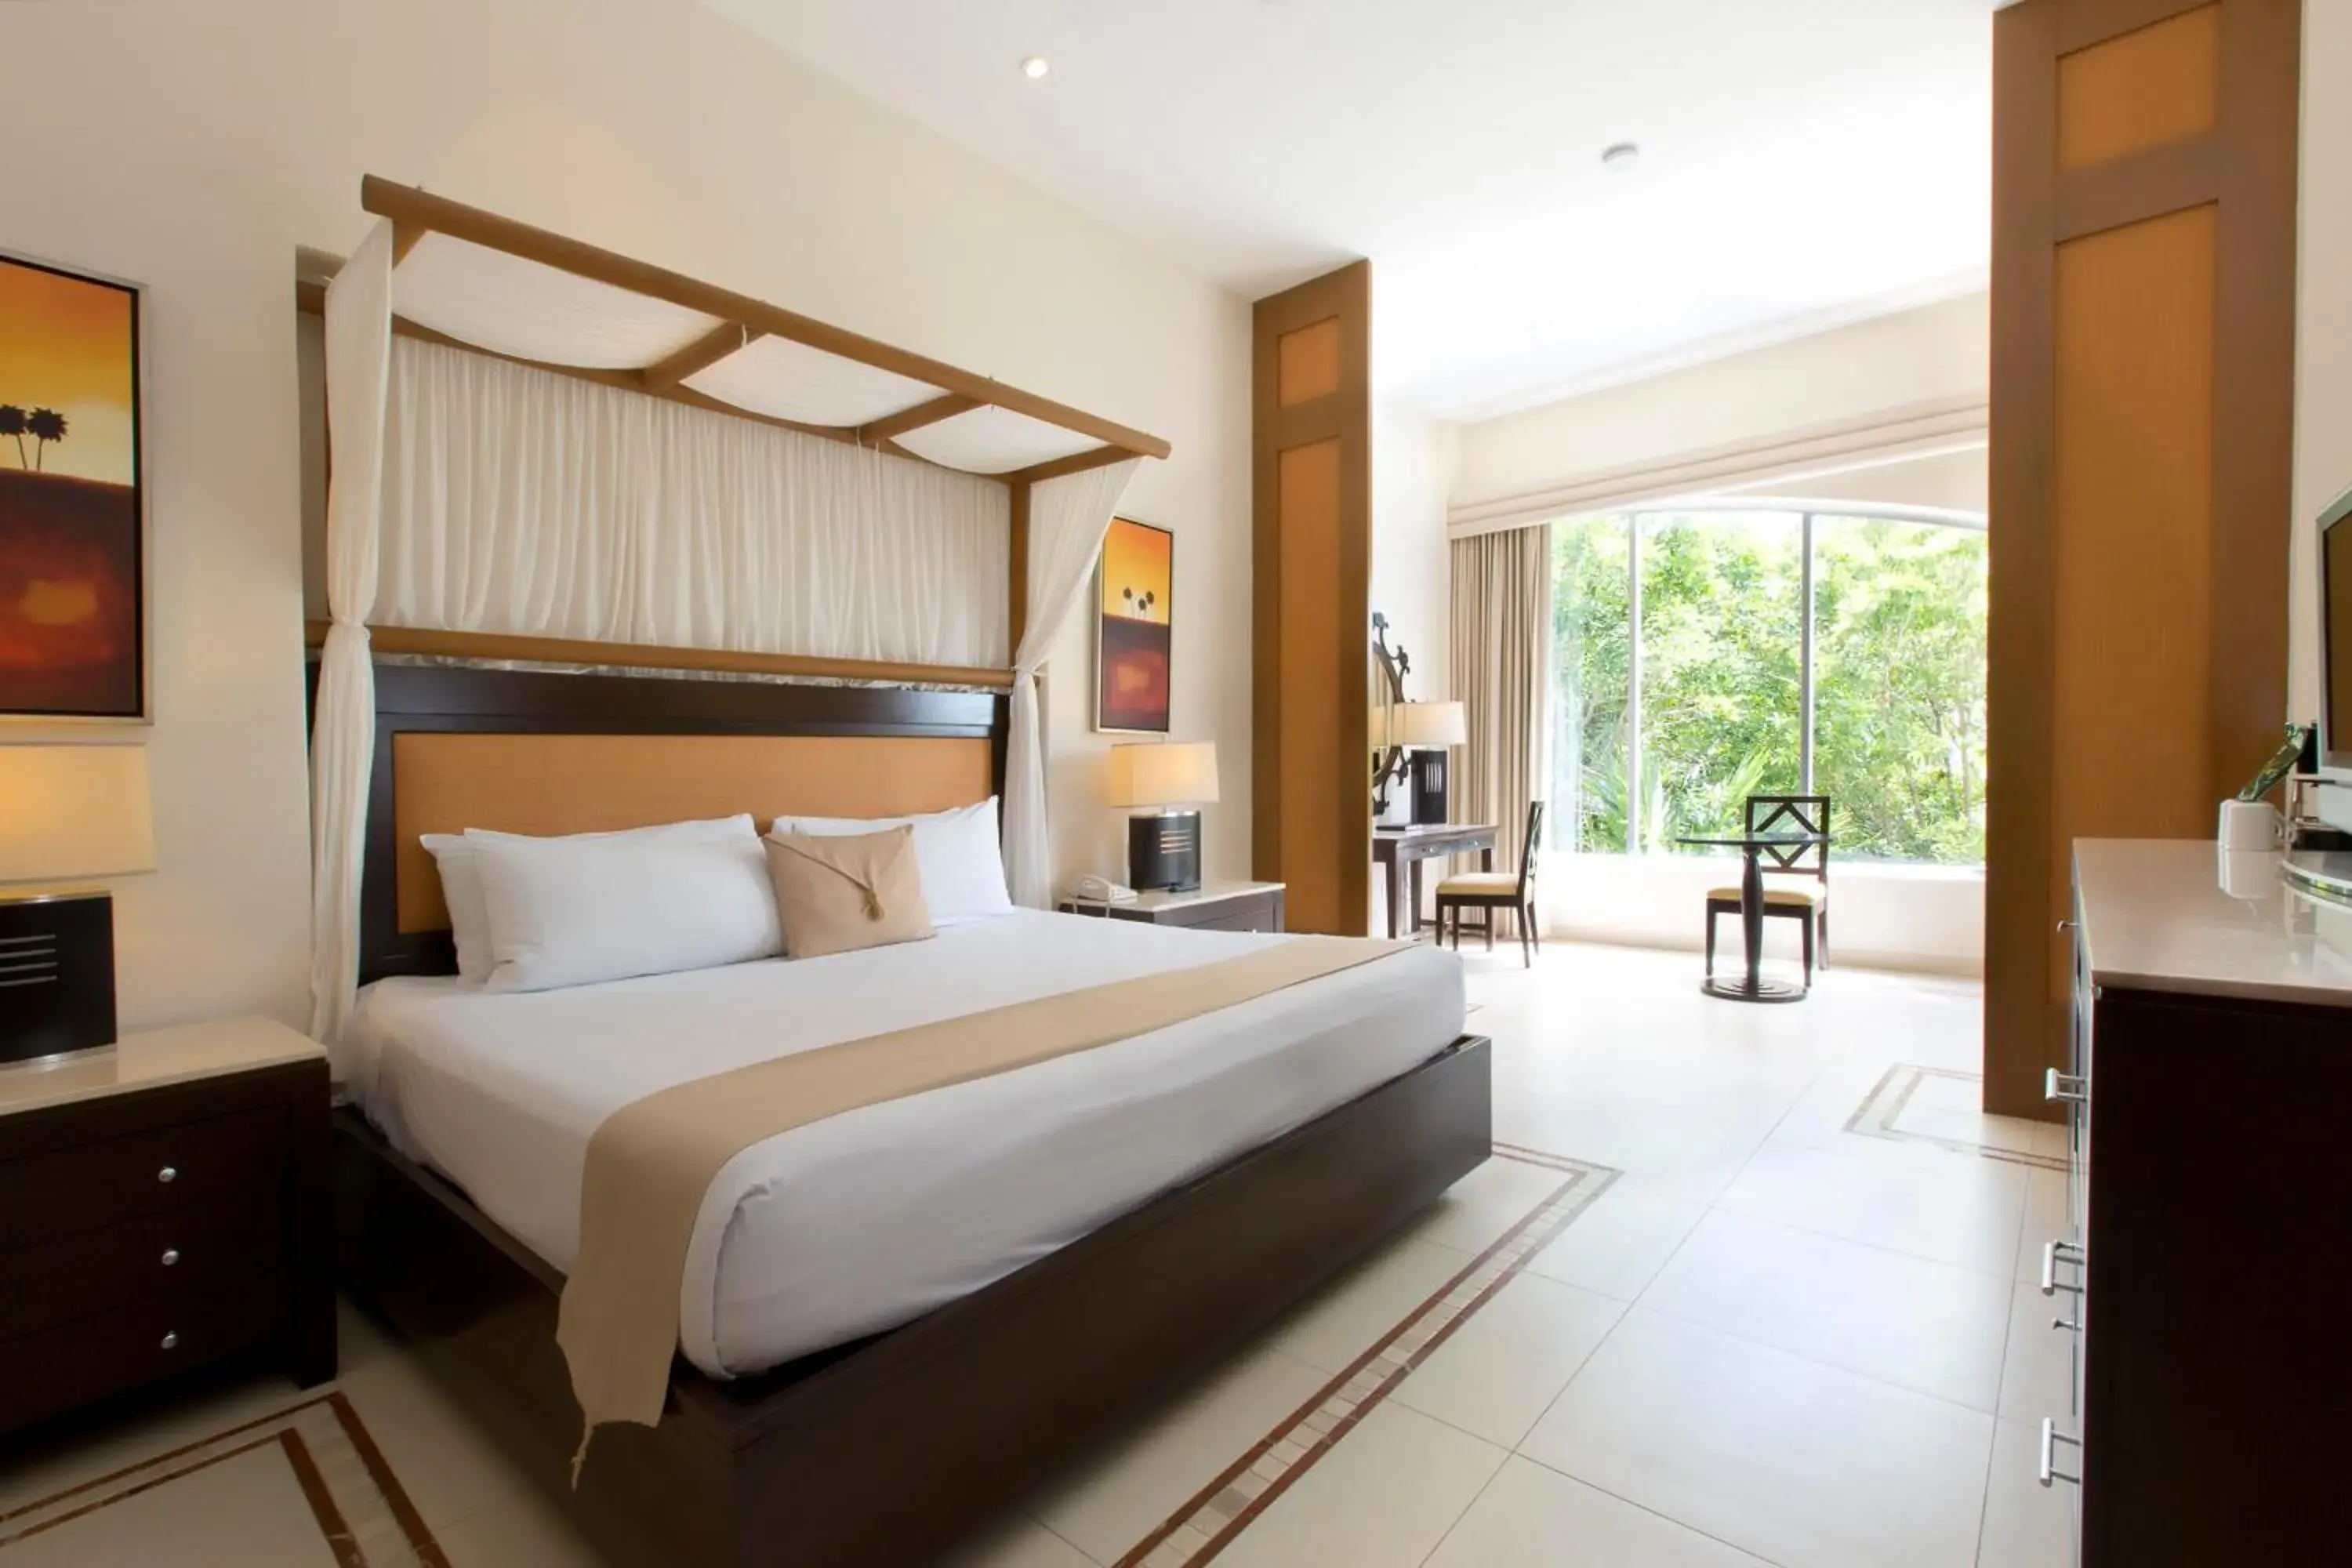 Bed, Room Photo in Kore Tulum Retreat Wellness Resort - Adults Only